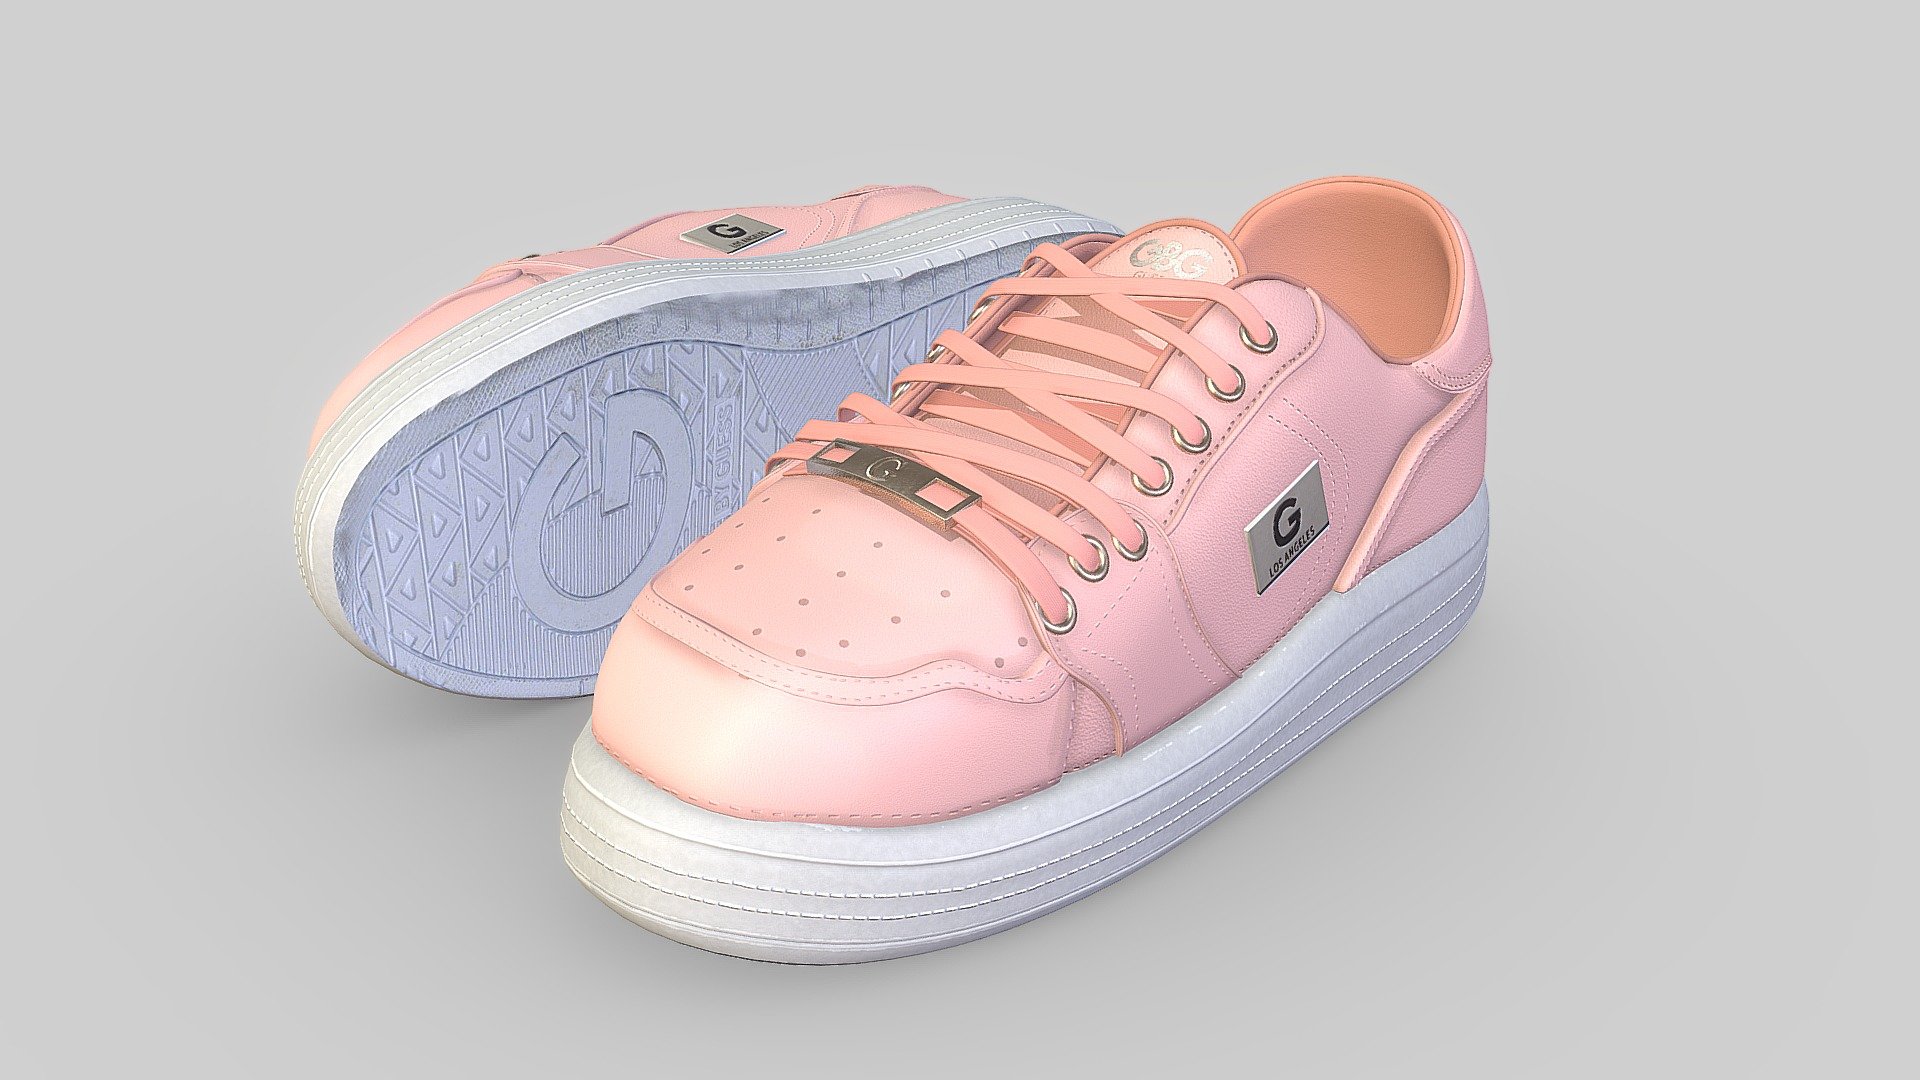 3d shoe los angeles pink create with blender 2.81 and obj,dae file texture with subtance painter PBR

texture 4096x4096 - Shoe Los Angeles G - Buy Royalty Free 3D model by FR Animation (@fr.animation) 3d model